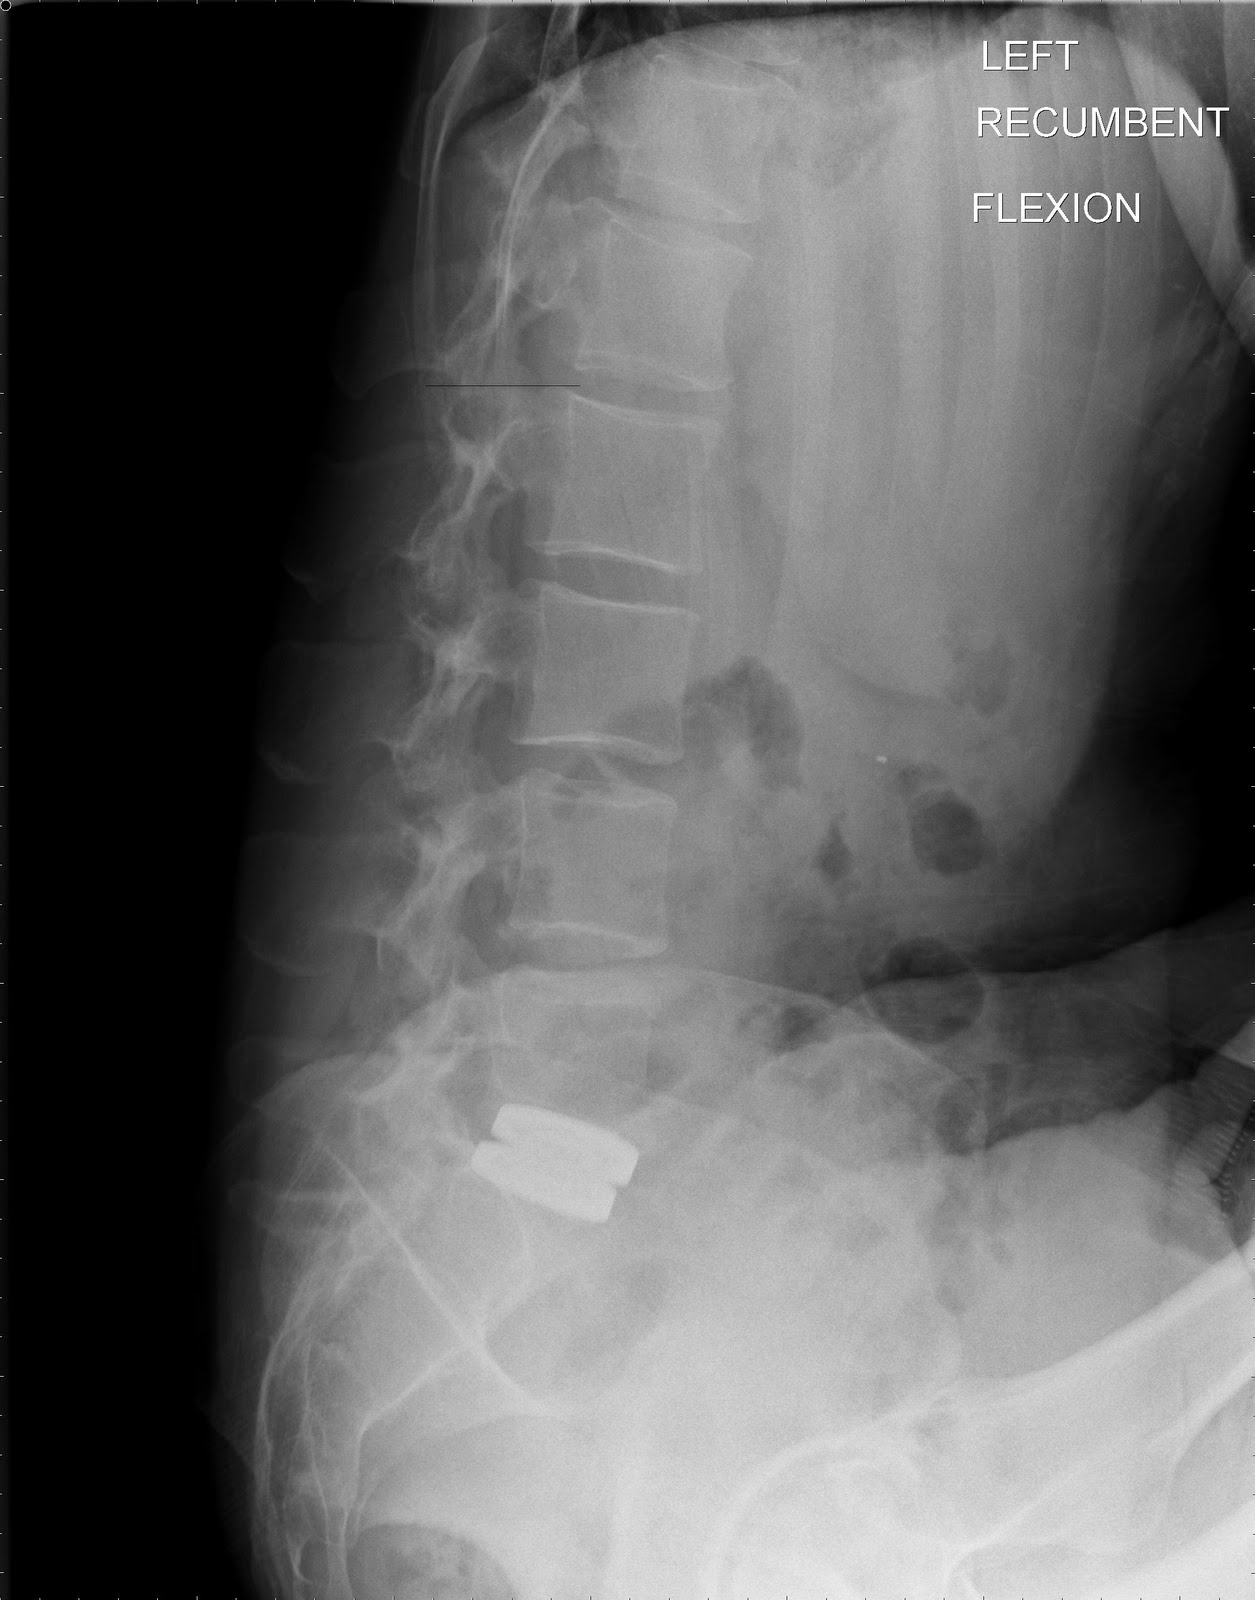 l2 l3 herniated disk xray images